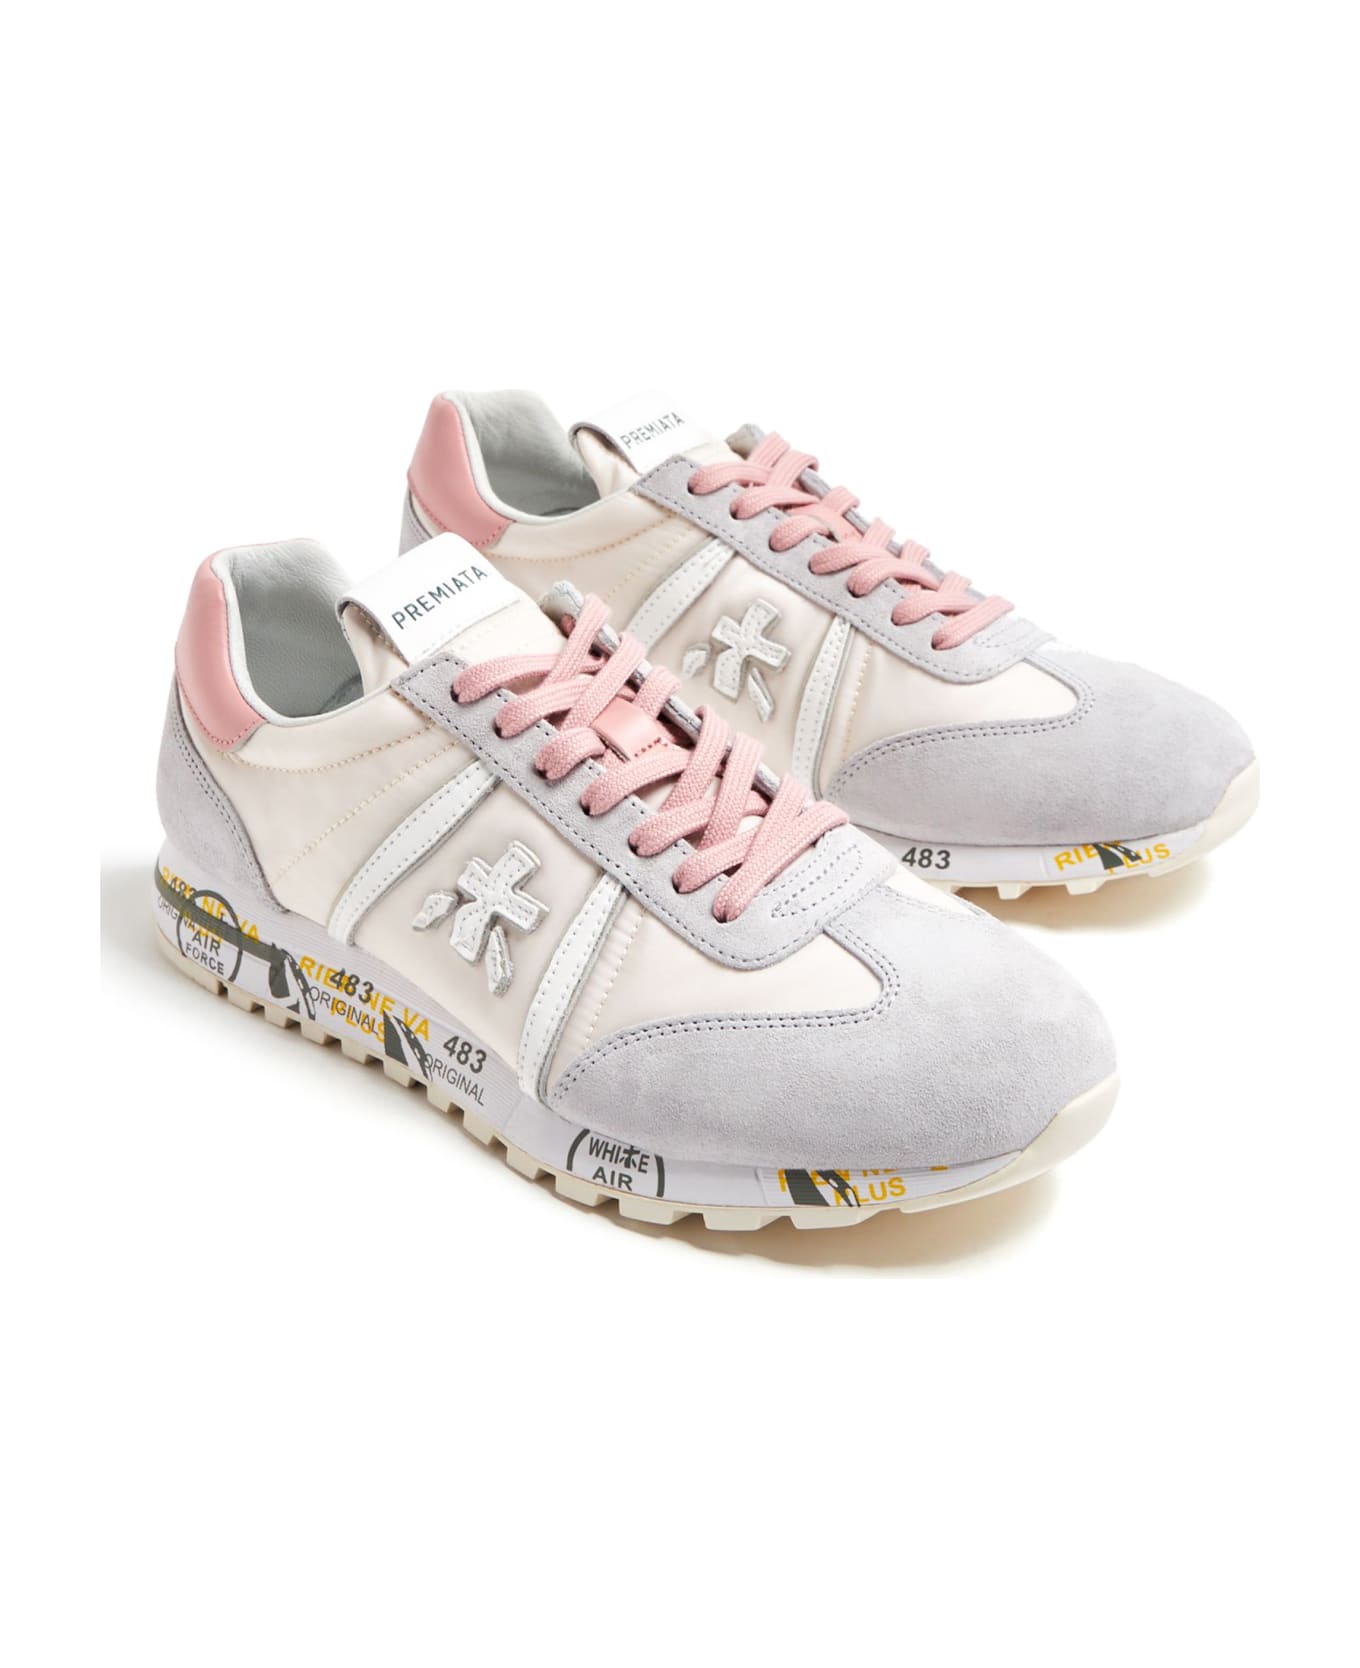 Premiata Grey Suede And Beige Nylon Lucy Sneakers - Grey スニーカー